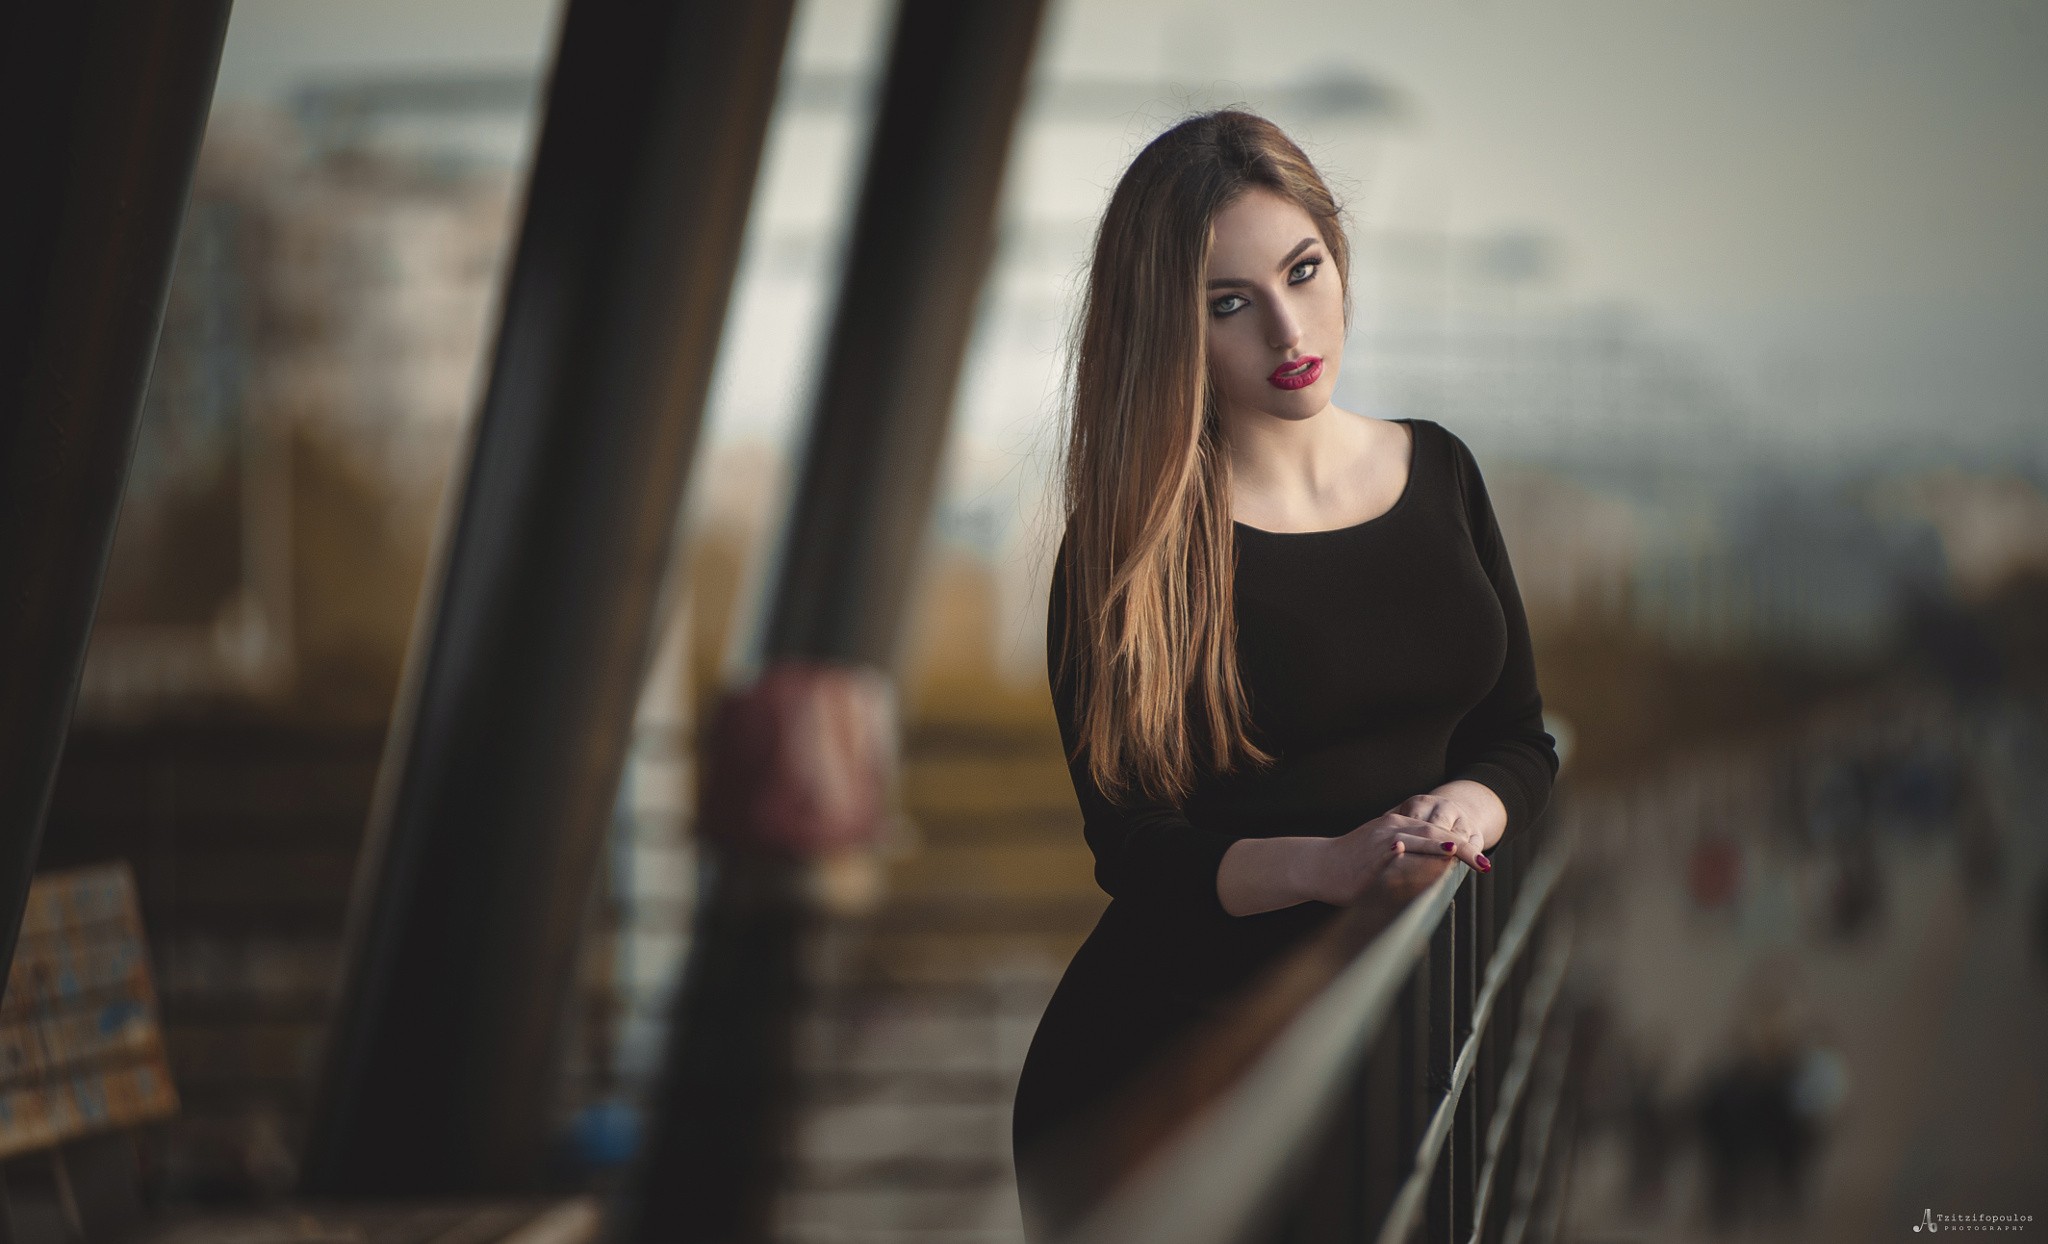 People 2048x1244 women portrait dress balcony looking at viewer long hair model red nails painted nails makeup straight hair black dress black clothing watermarked brunette Angelos Tzitzifopoulos